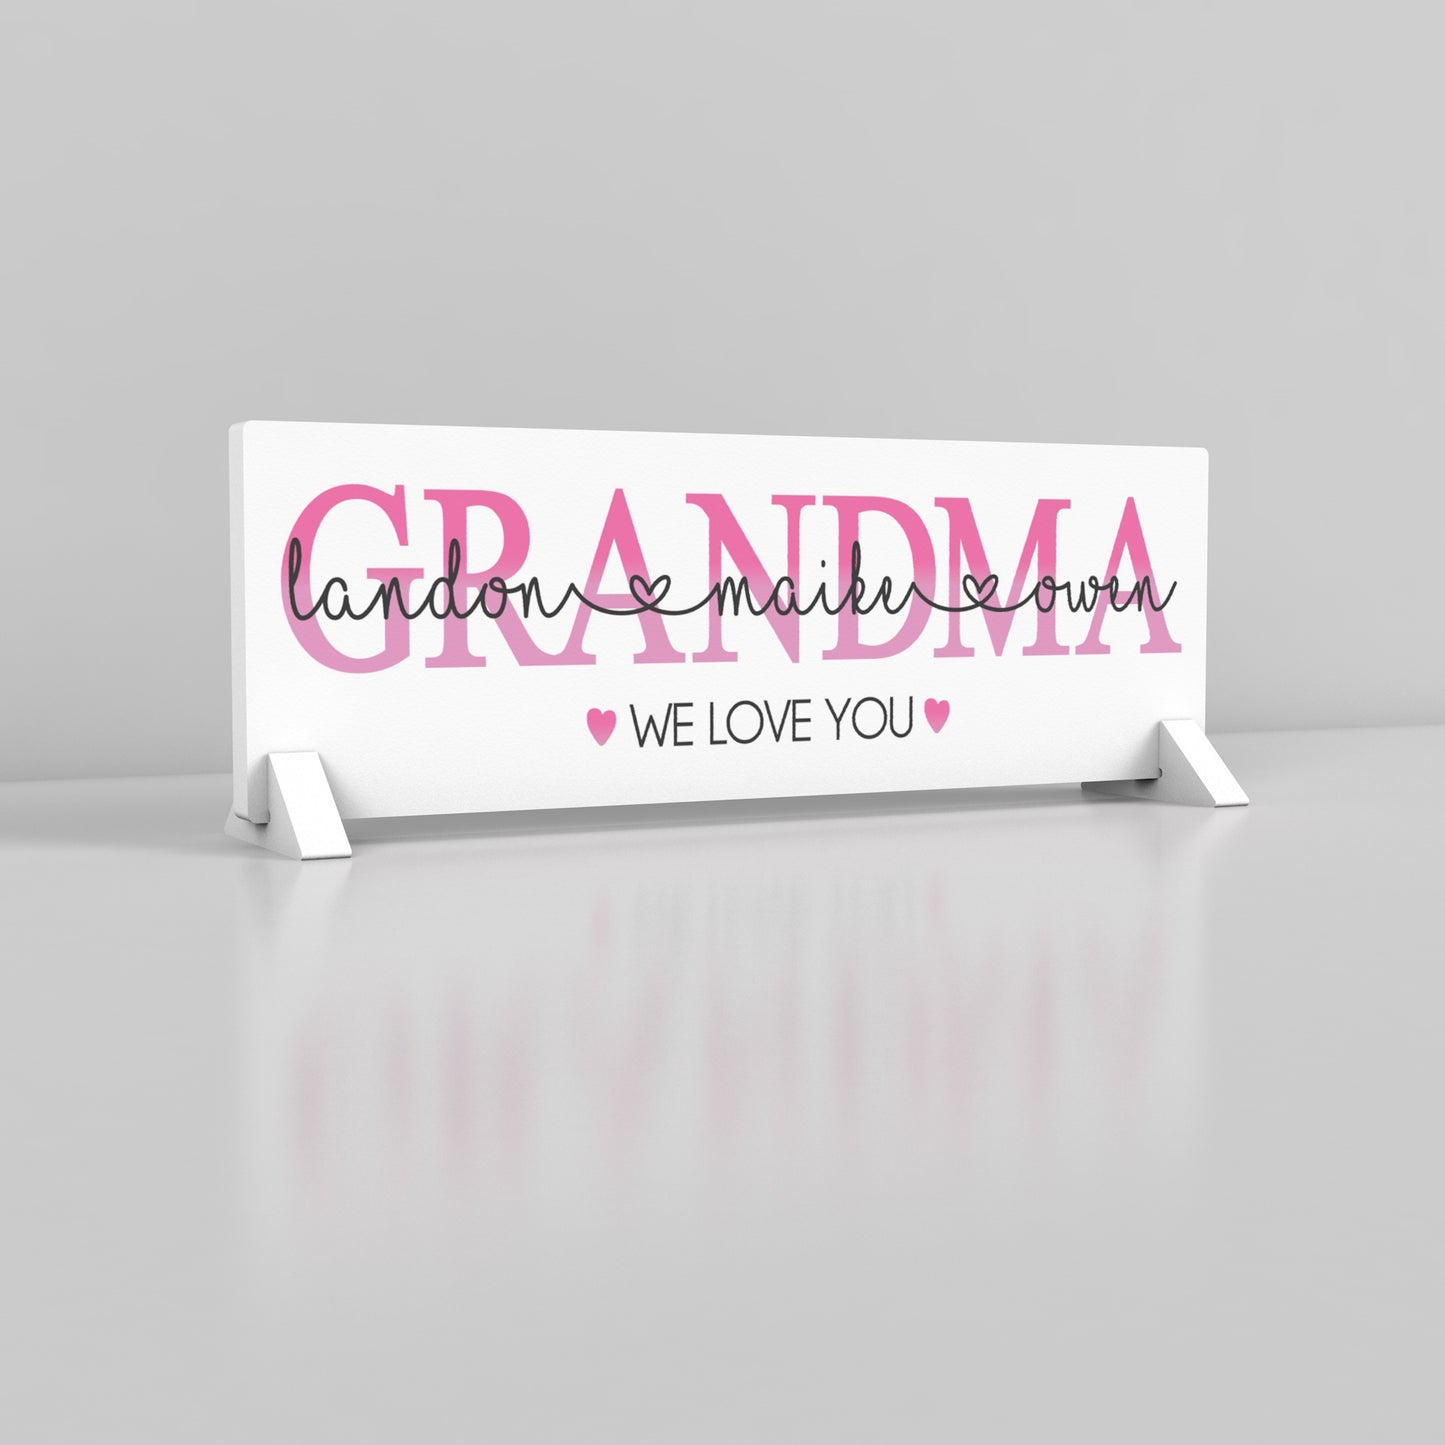 Personalized Mother's Day Gift From Kids, Grandma Sign, Mother's Day Gift, Gift Idea for Grandma